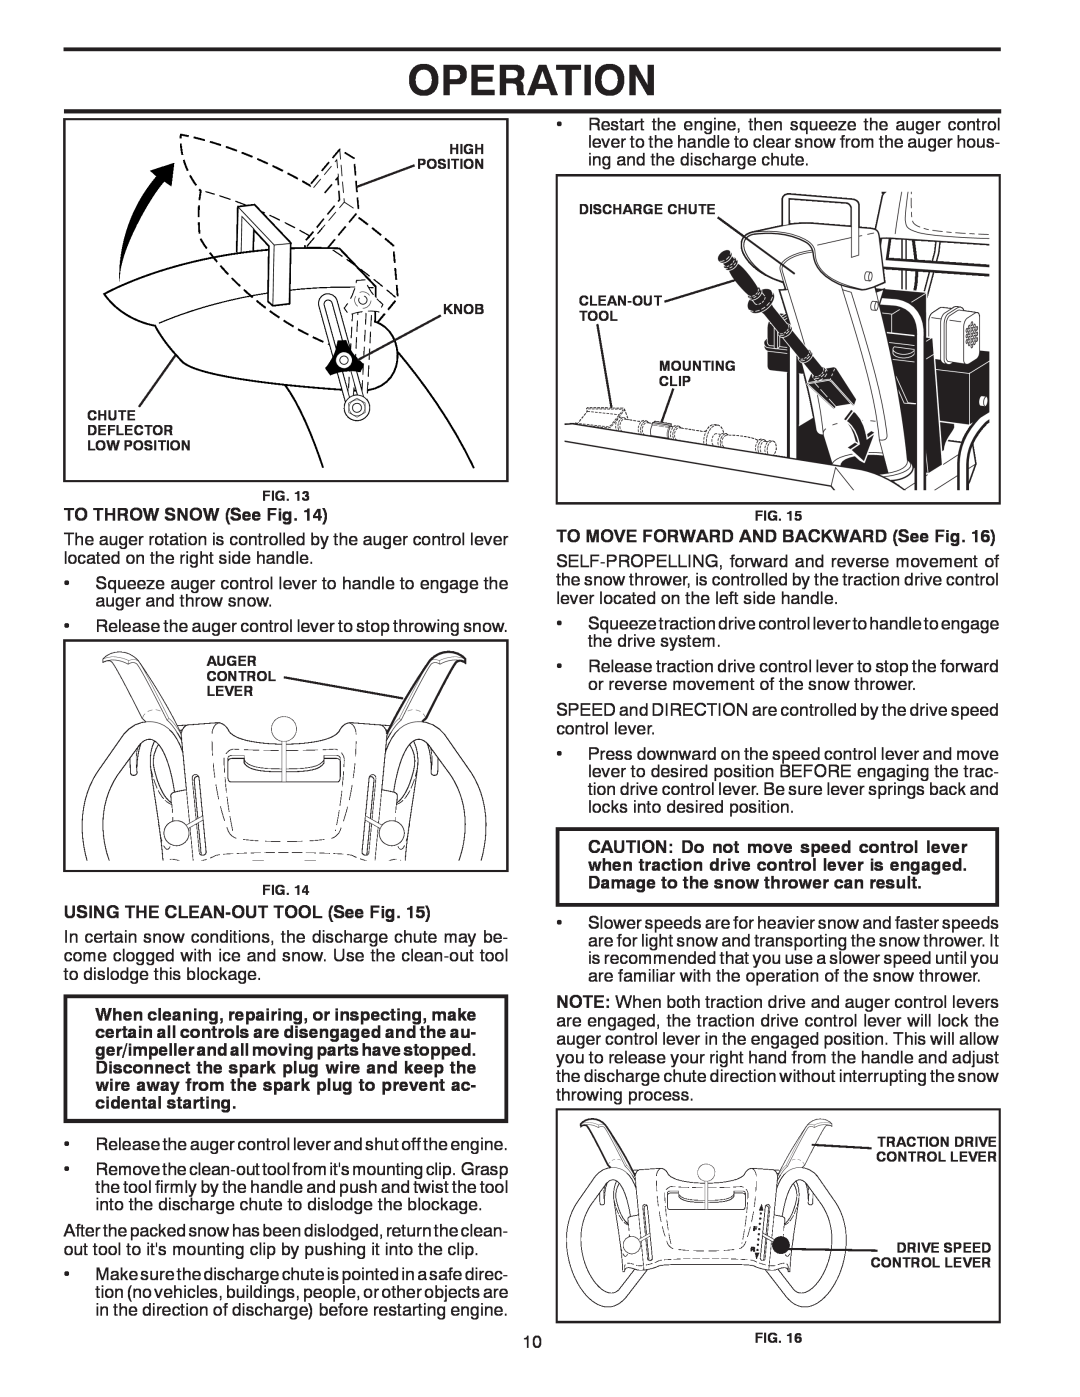 Poulan 96192002202, 422083 owner manual Operation, TO THROW SNOW See Fig, USING THE CLEAN-OUT TOOL See Fig 